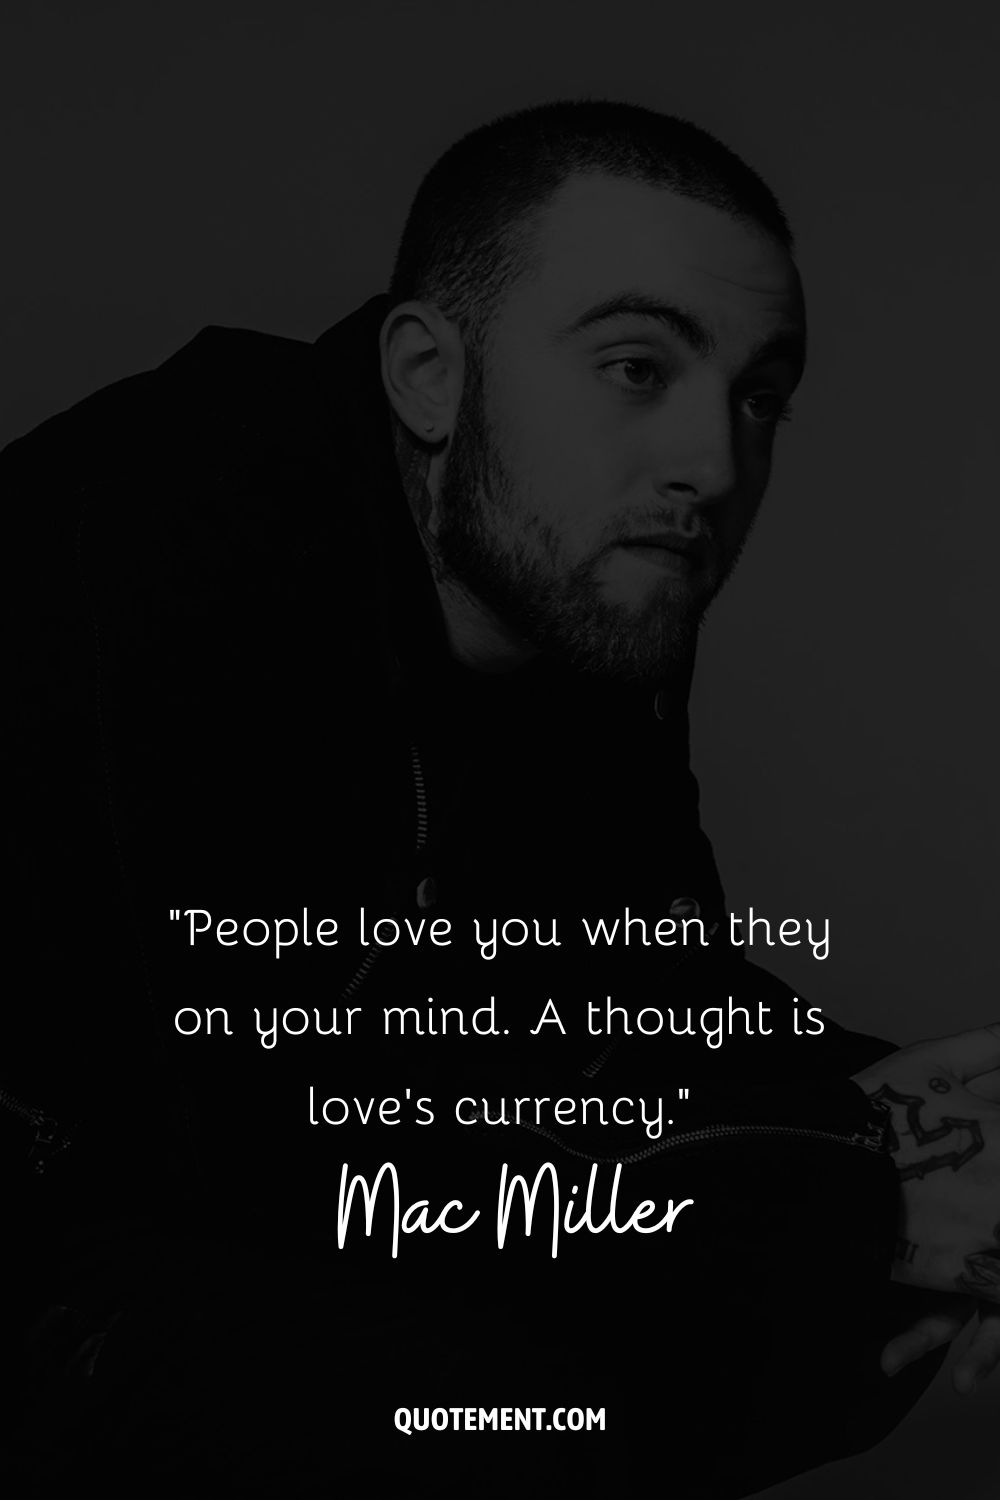 “People love you when they on your mind. A thought is love’s currency.” – Mac Miller